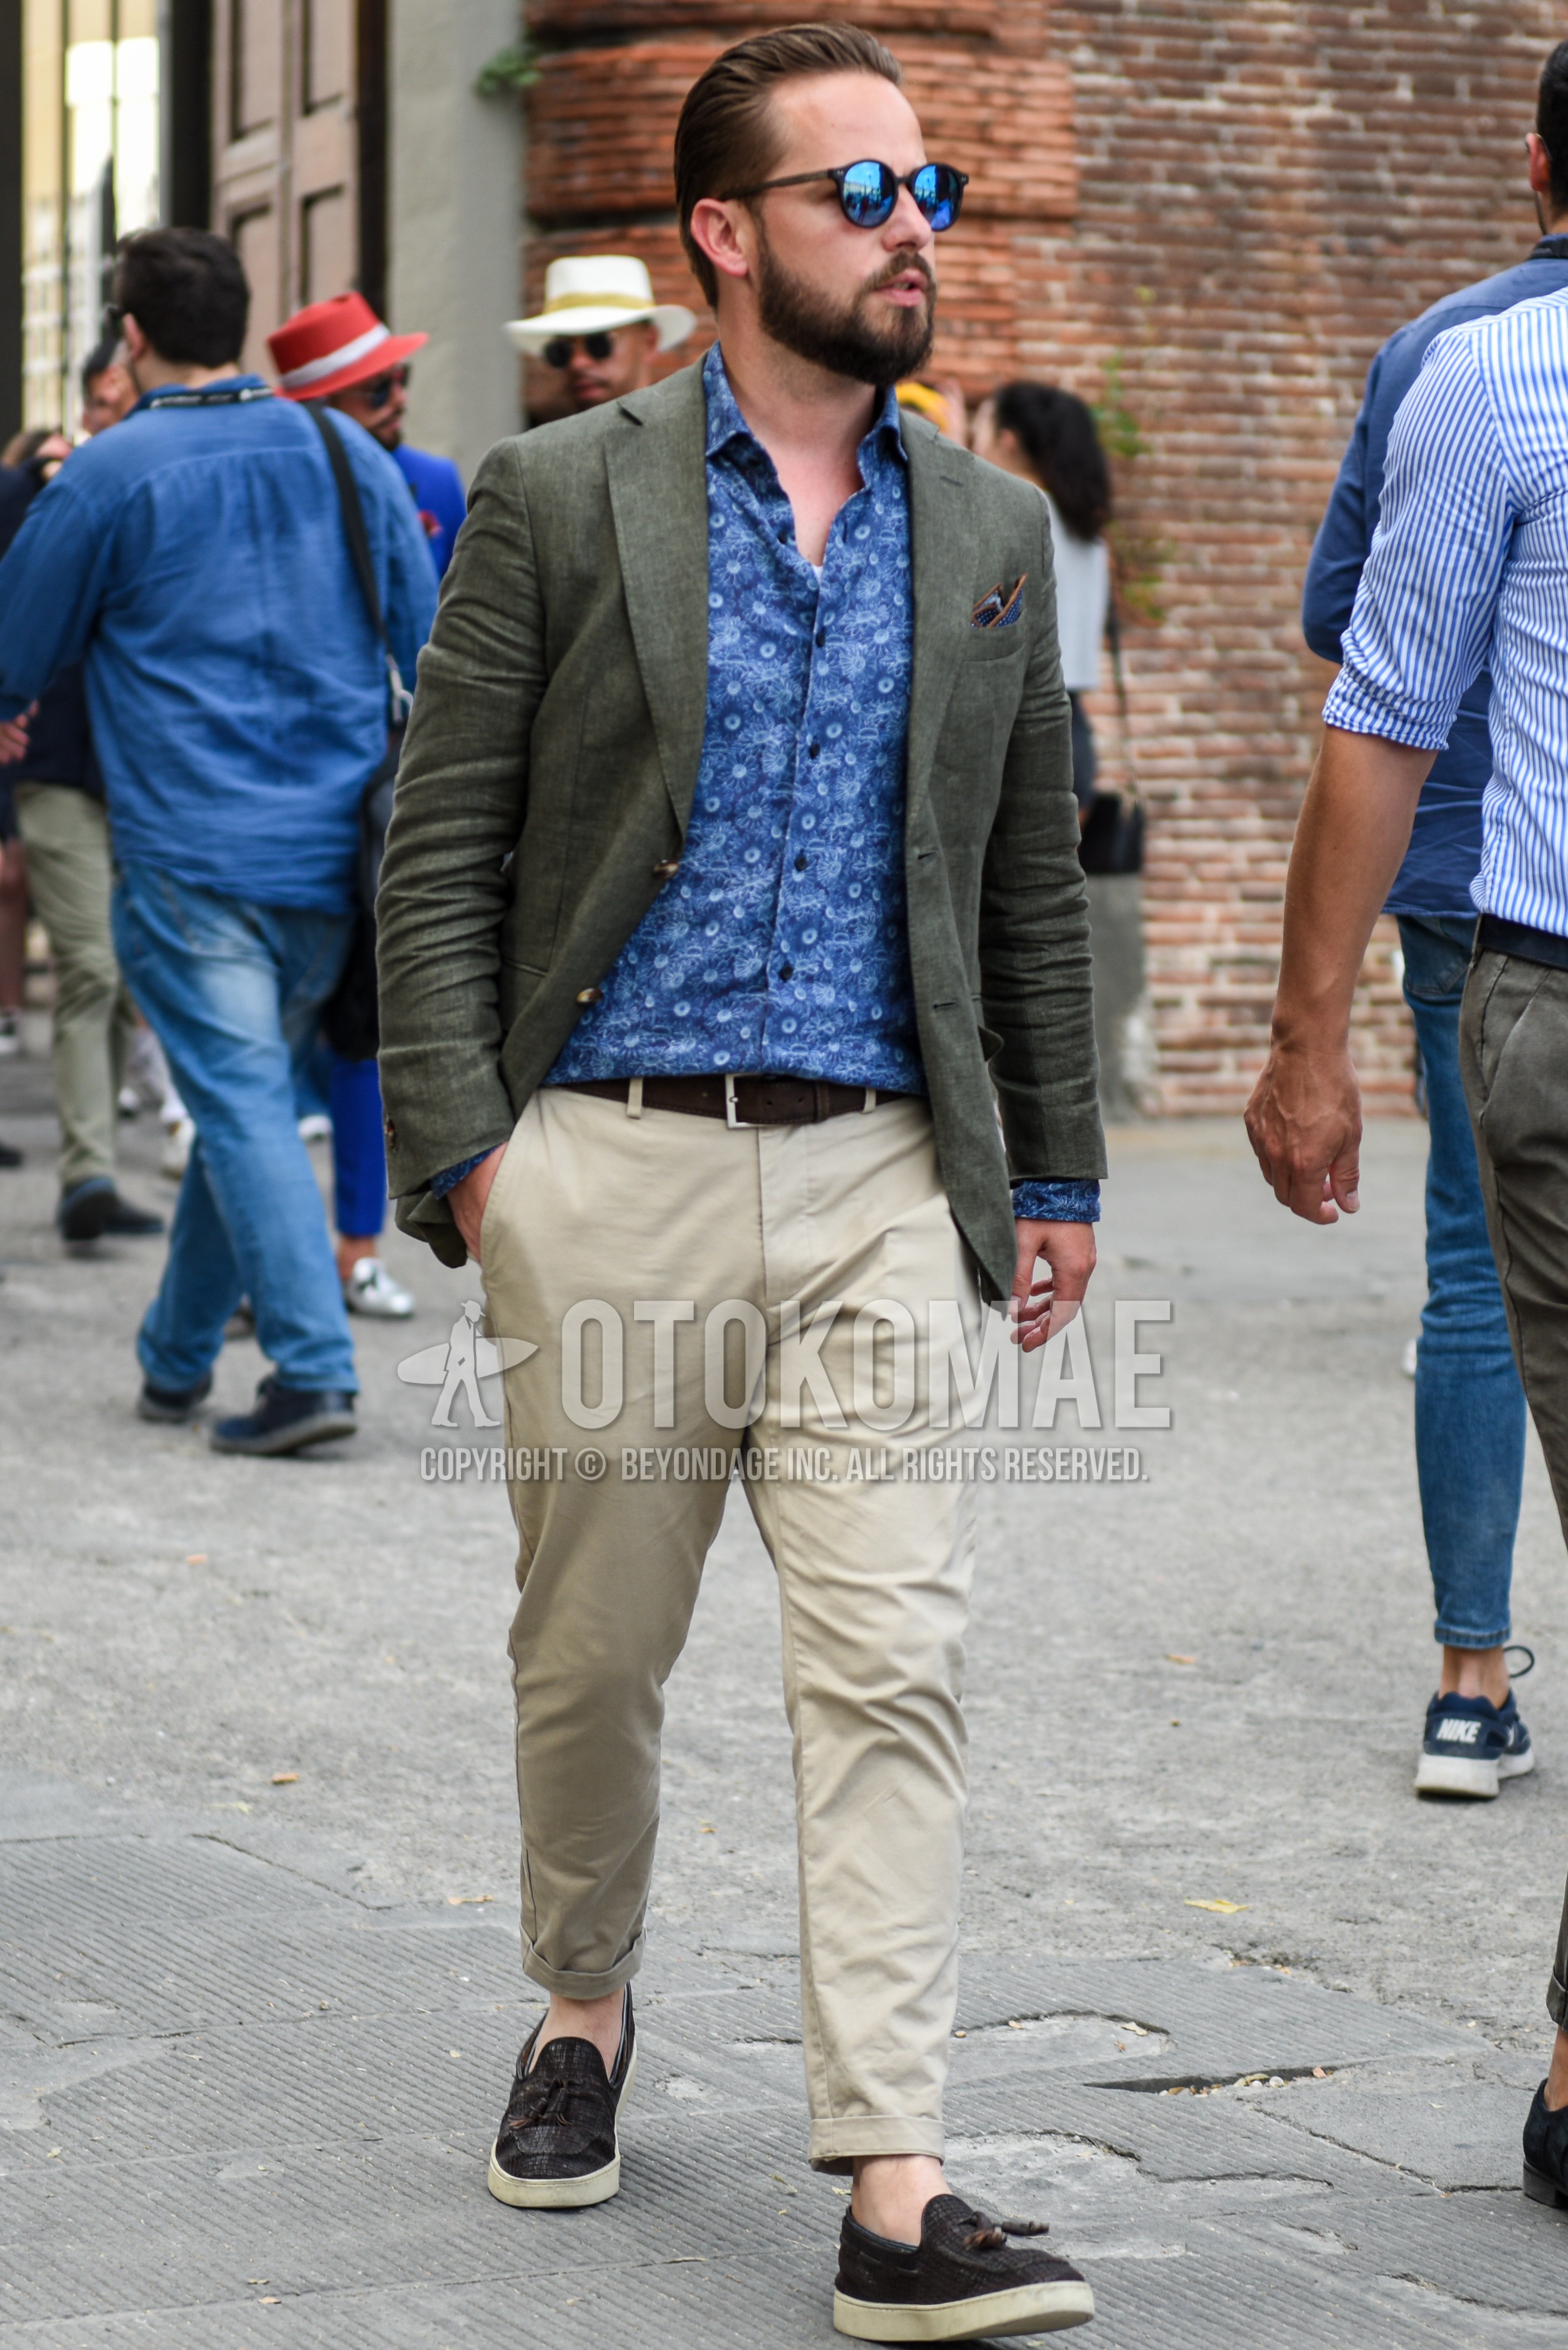 Men's spring summer autumn outfit with black plain sunglasses, olive green plain tailored jacket, blue tops/innerwear shirt, brown plain leather belt, beige plain chinos, brown low-cut sneakers.